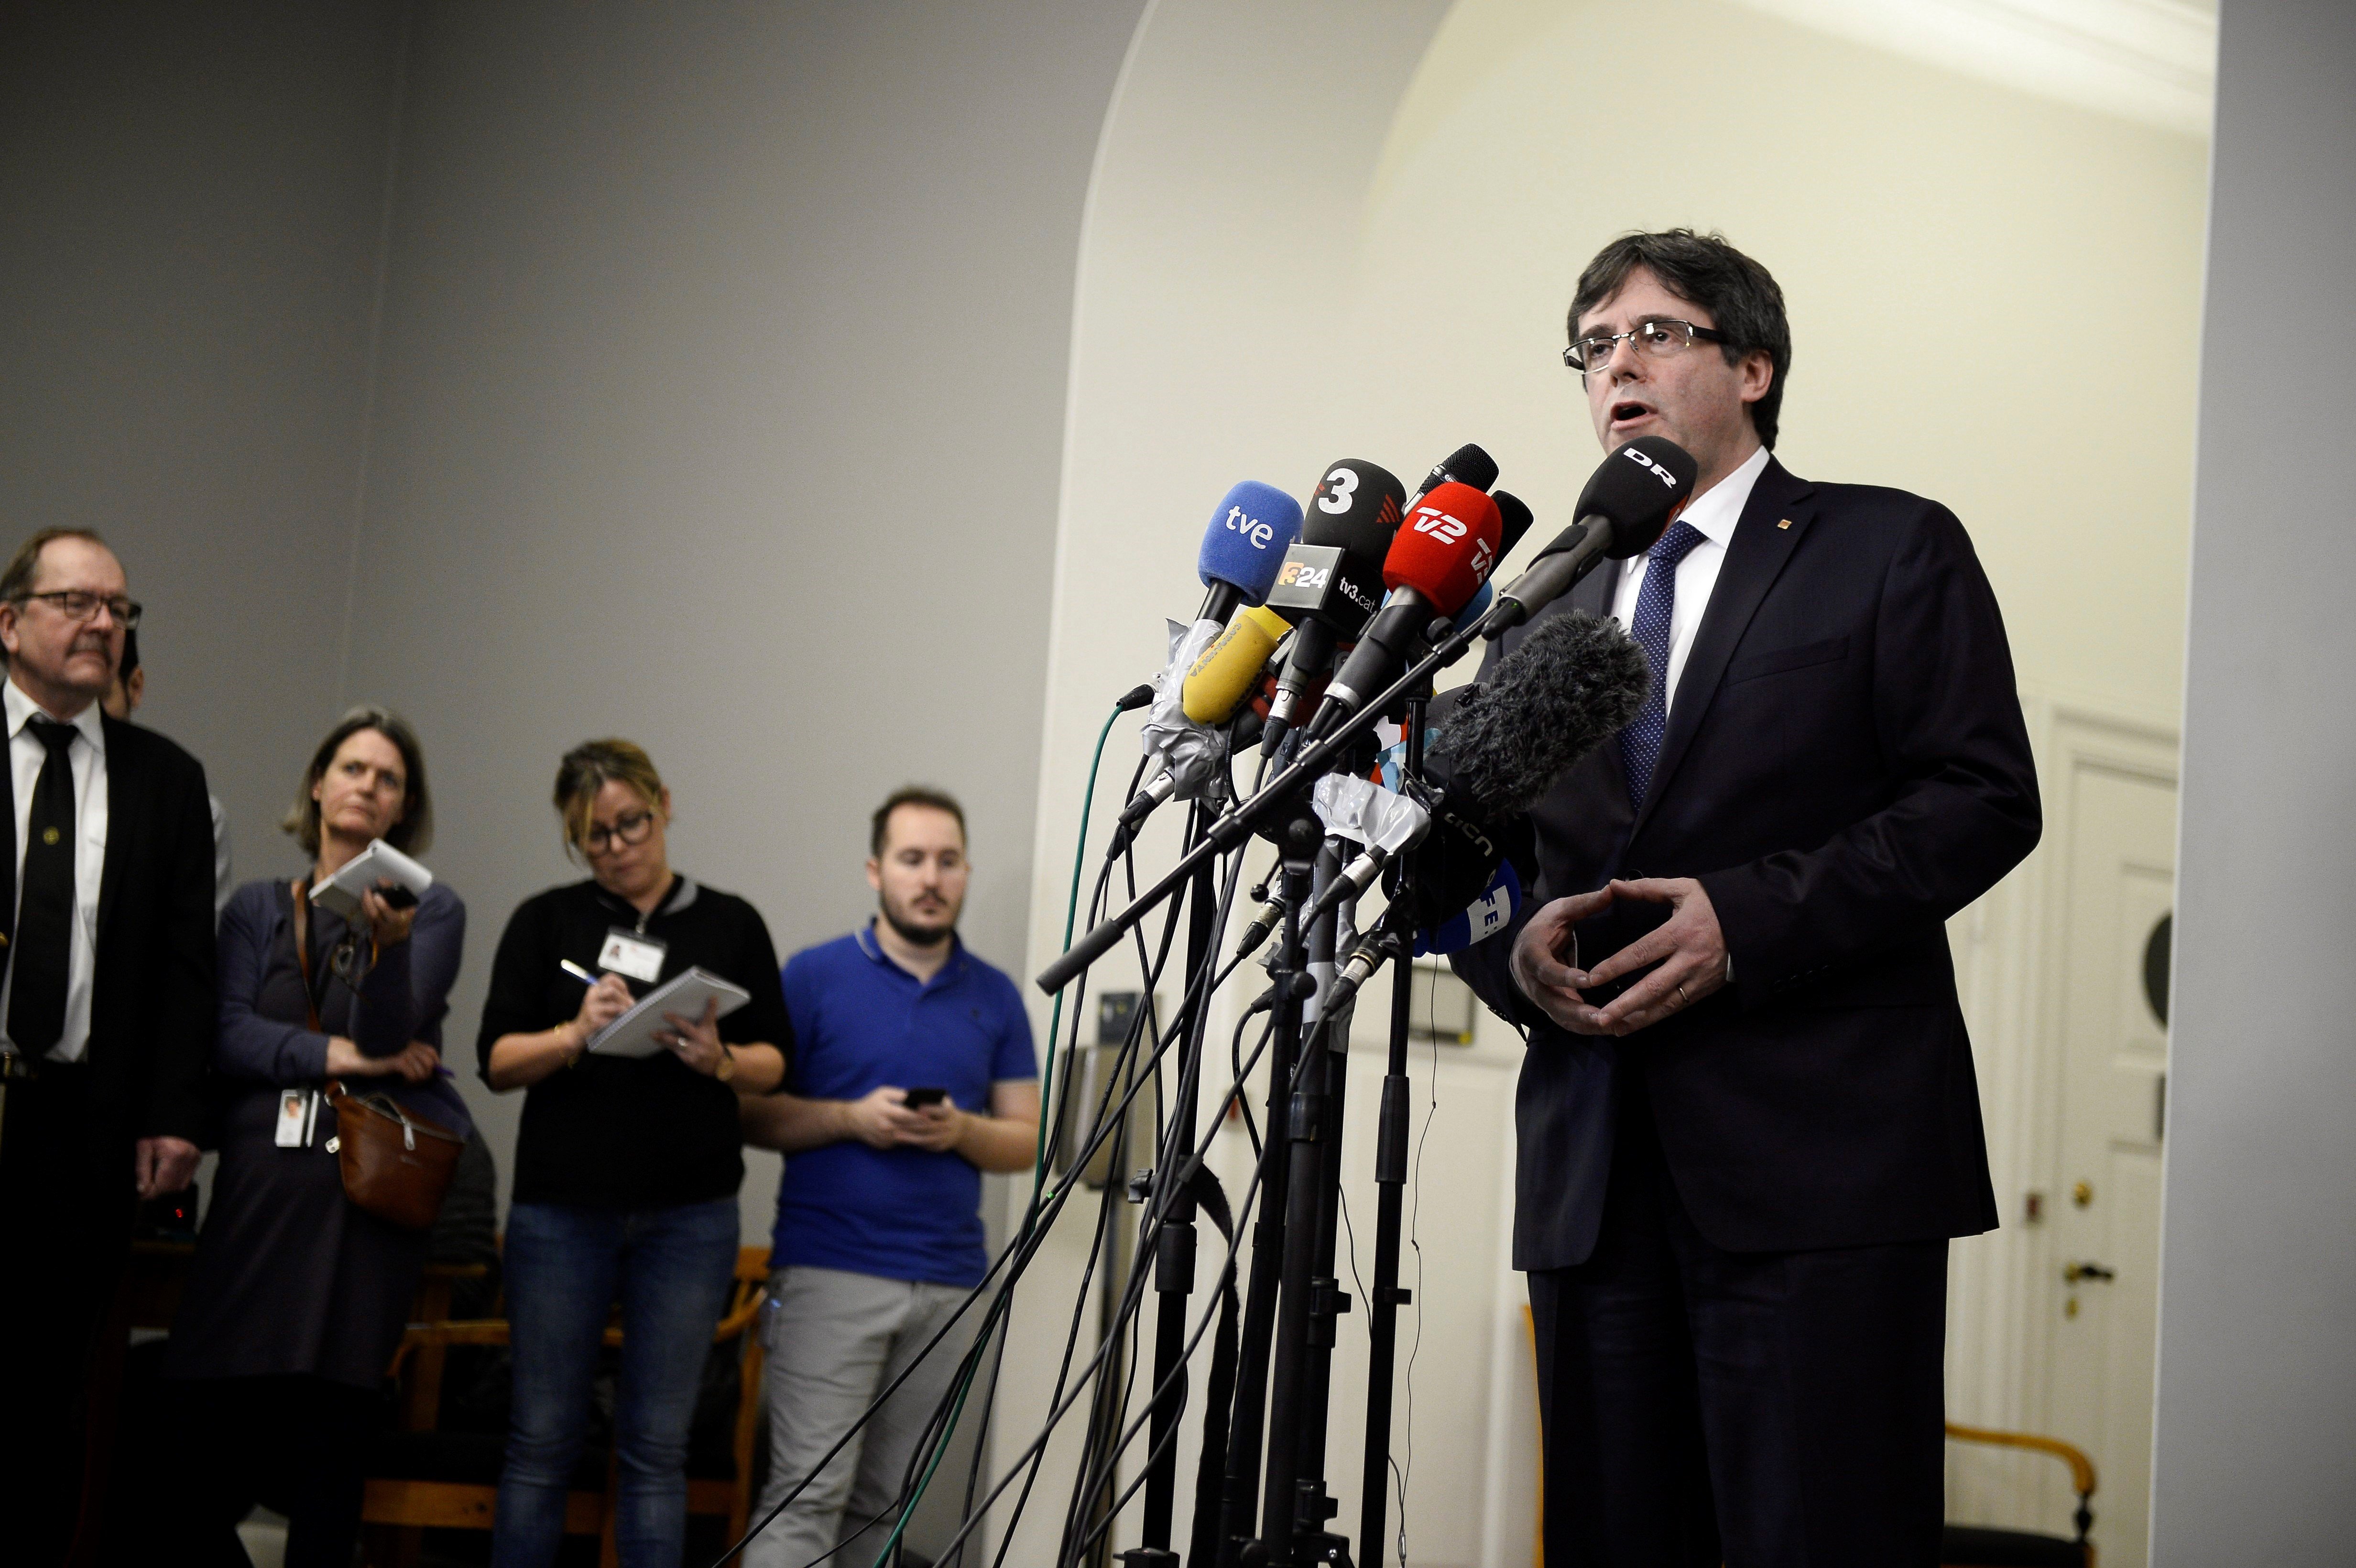 Puigdemont asks to be able to return "without threats" for presidential investiture